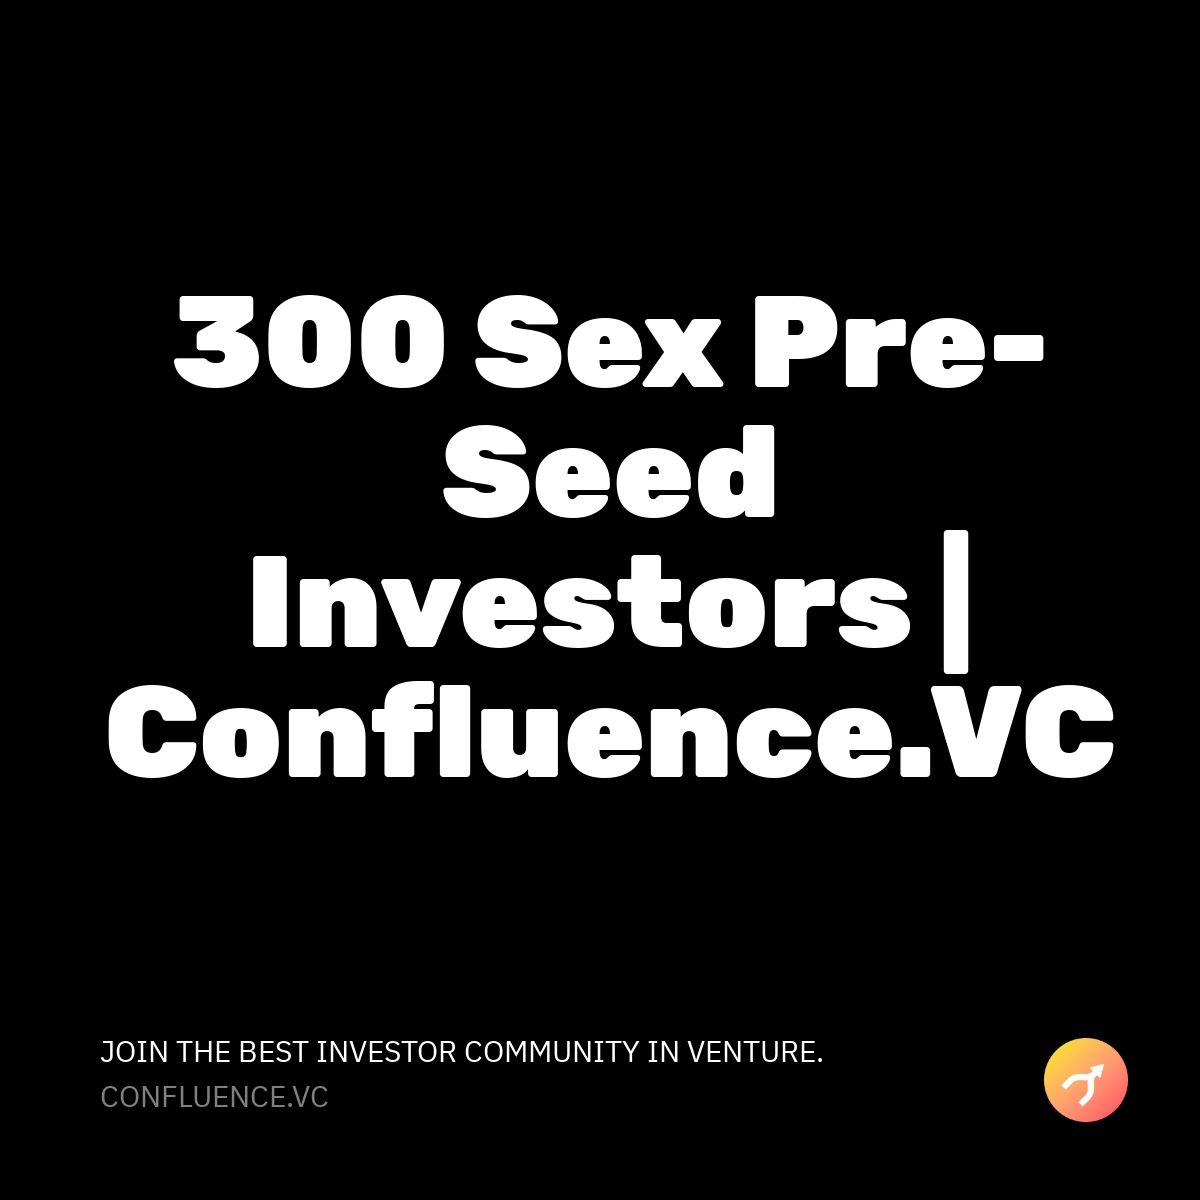 300 Pre Seed Investors That Invest In Sex Confluence Vc